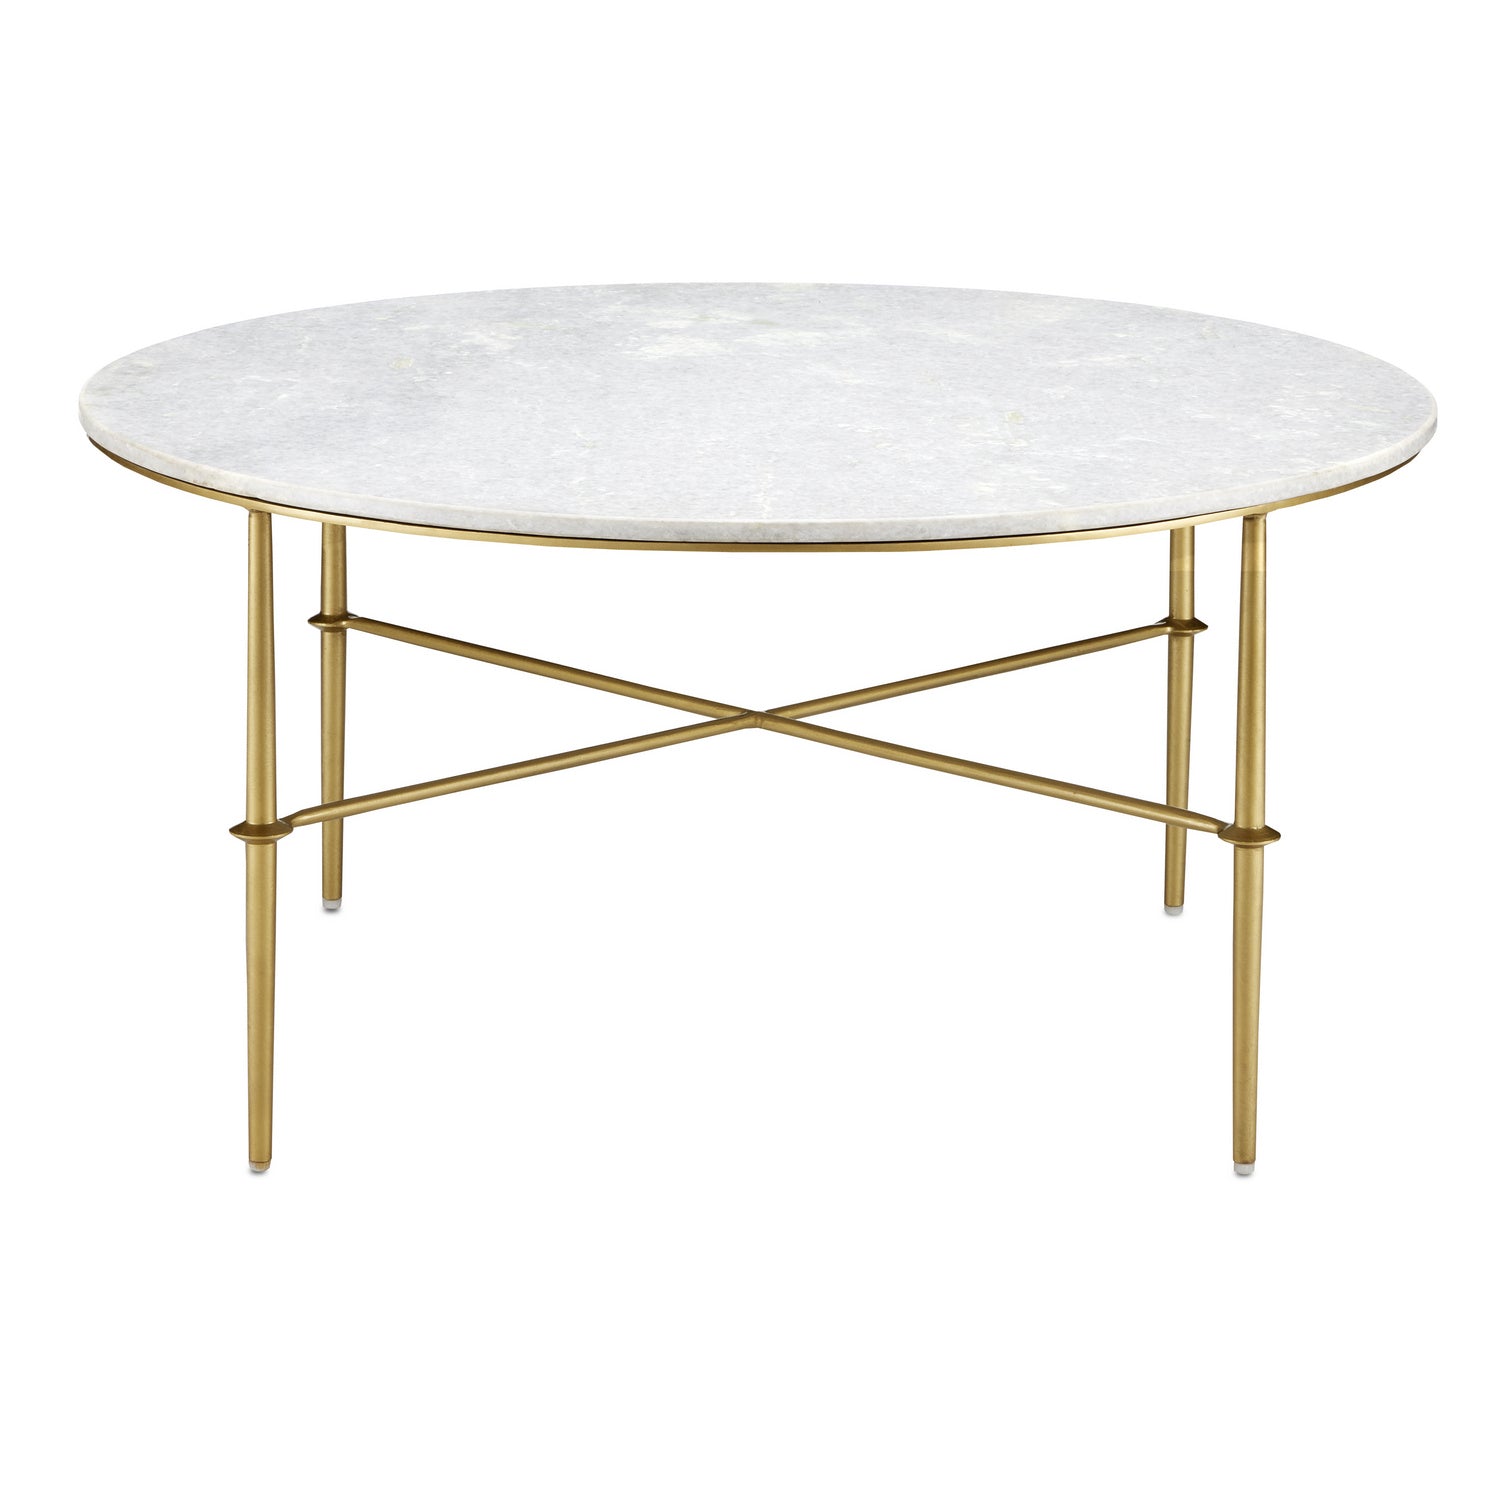 Cocktail Table from the Kira collection in White/Antique Brass finish